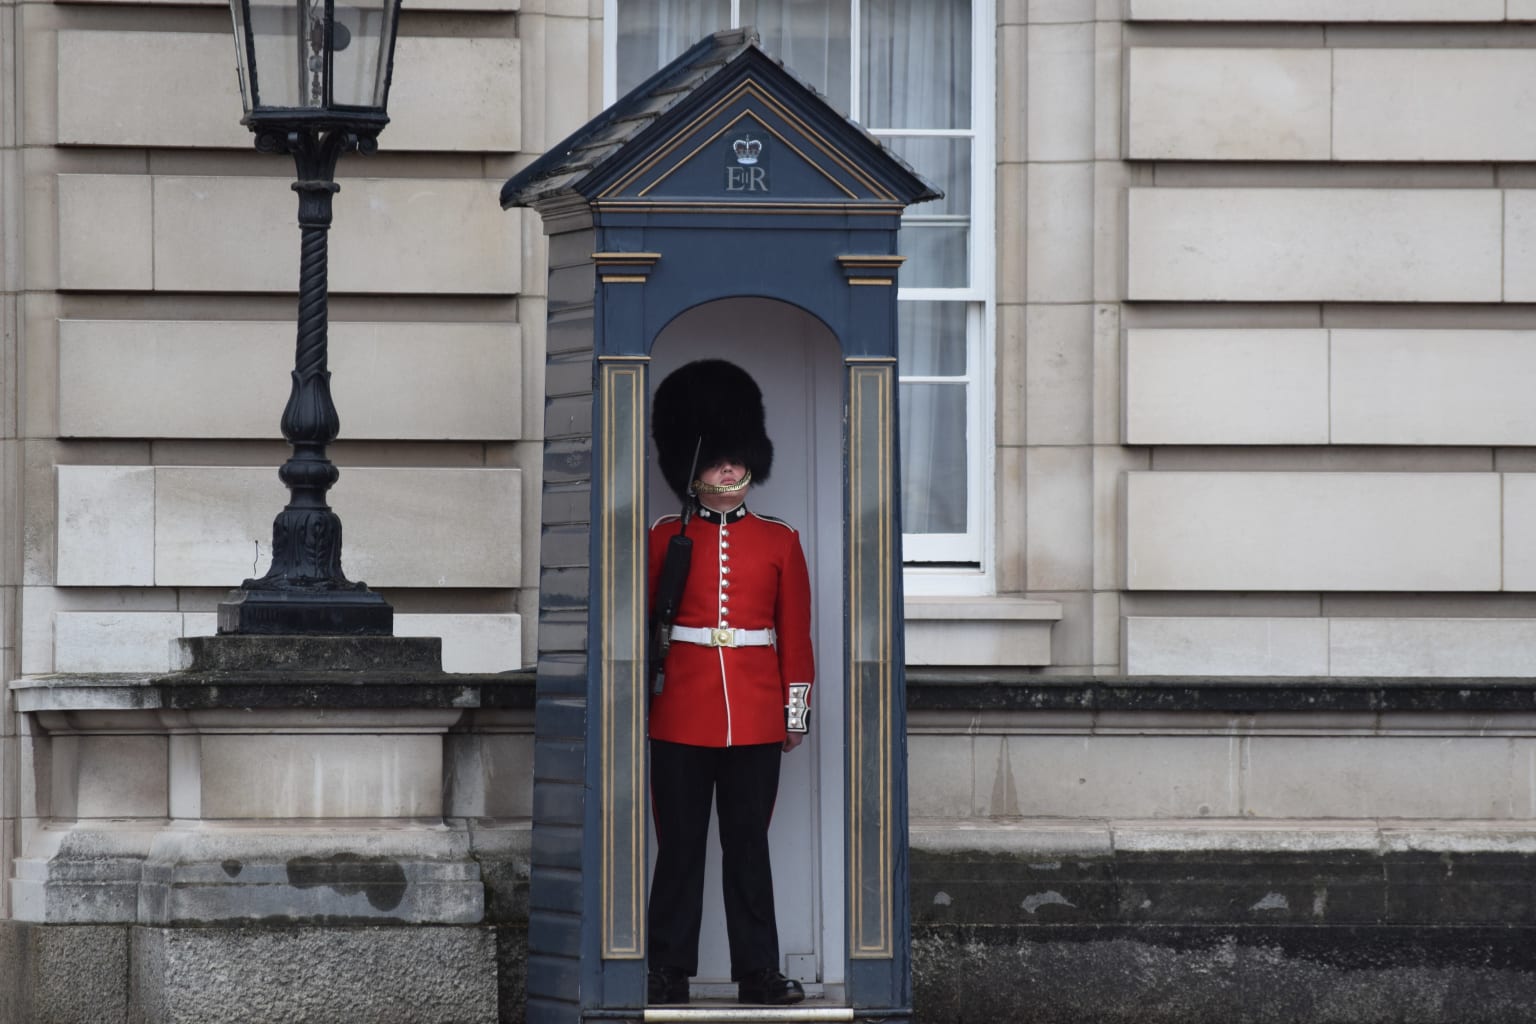 A royal guard in London, England.